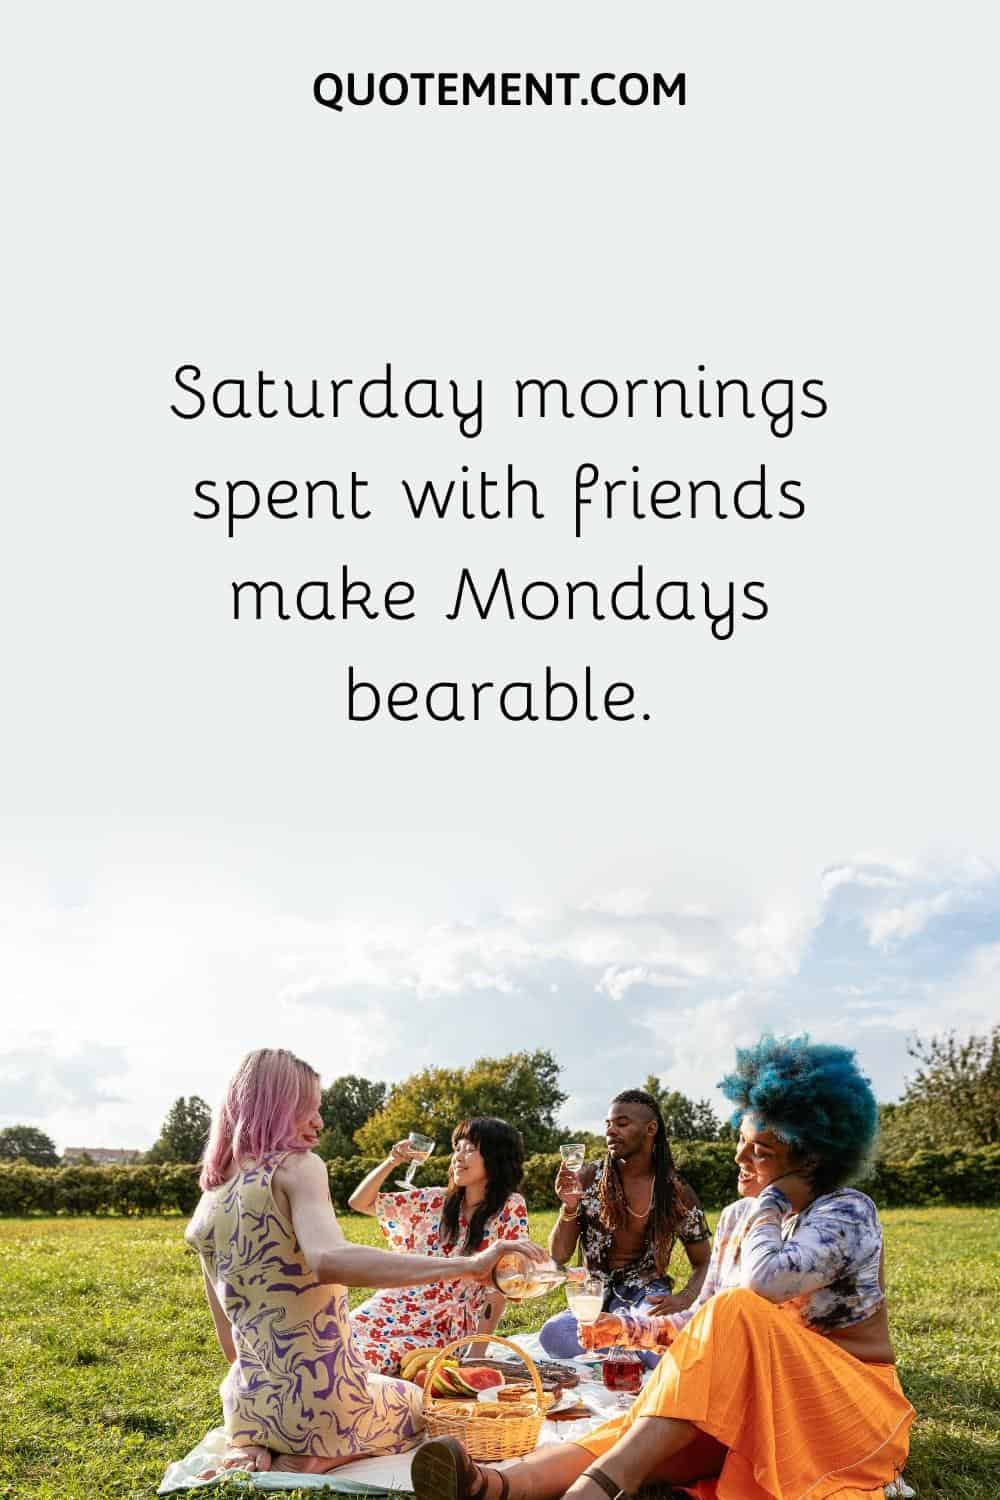 Saturday mornings spent with friends make Mondays bearable.